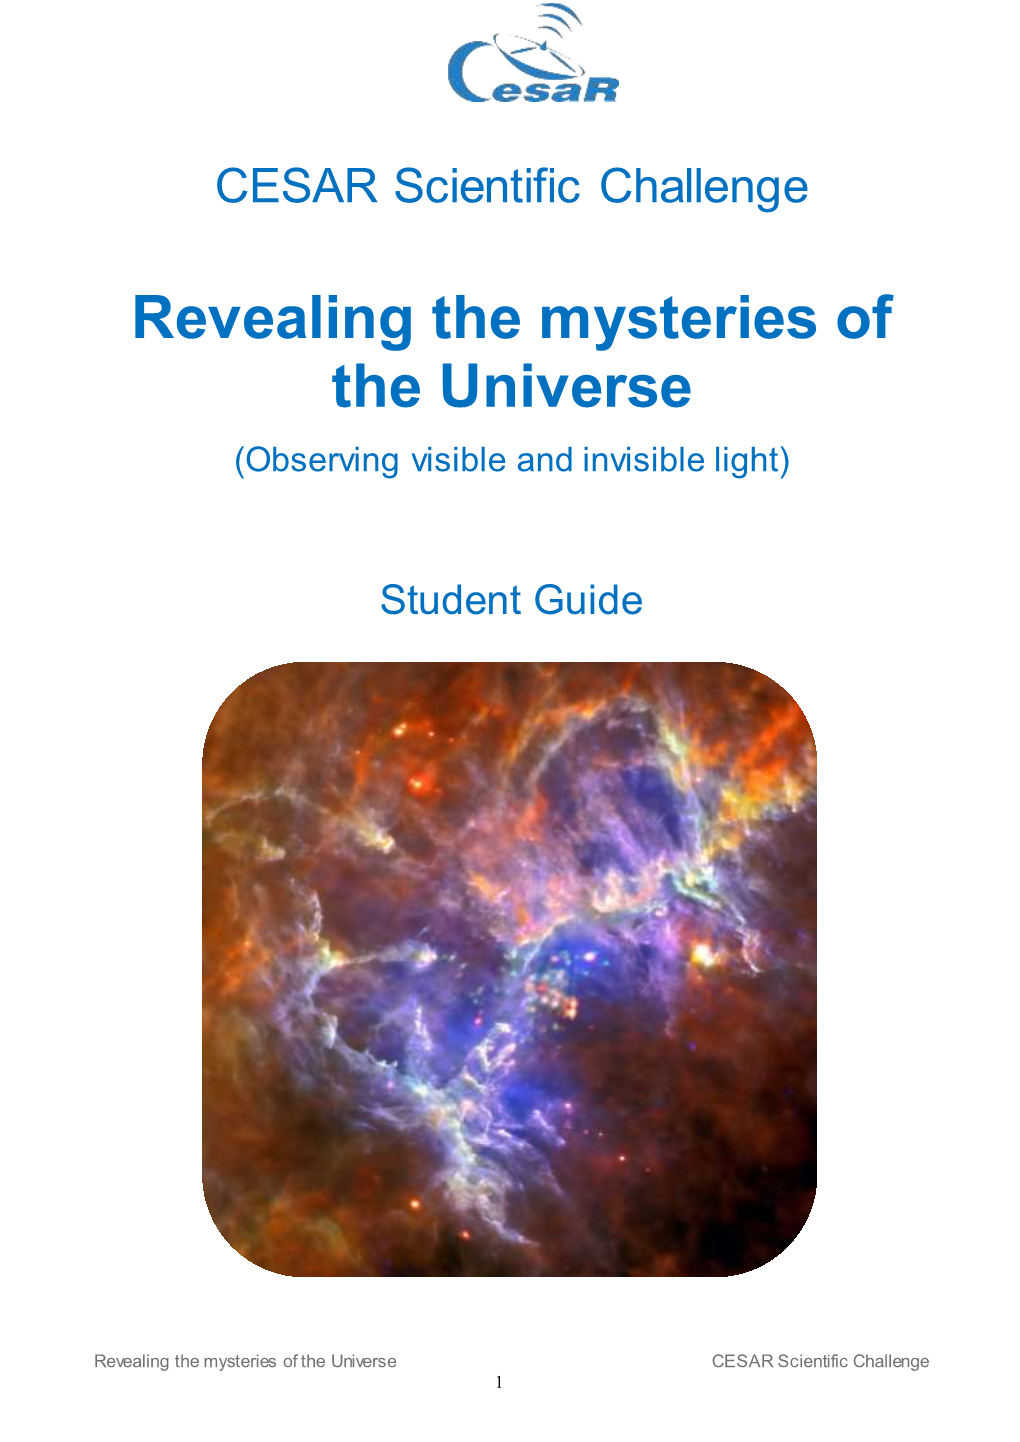 Revealing the Mysteries of the Universe (Observing Visible and Invisible Light)